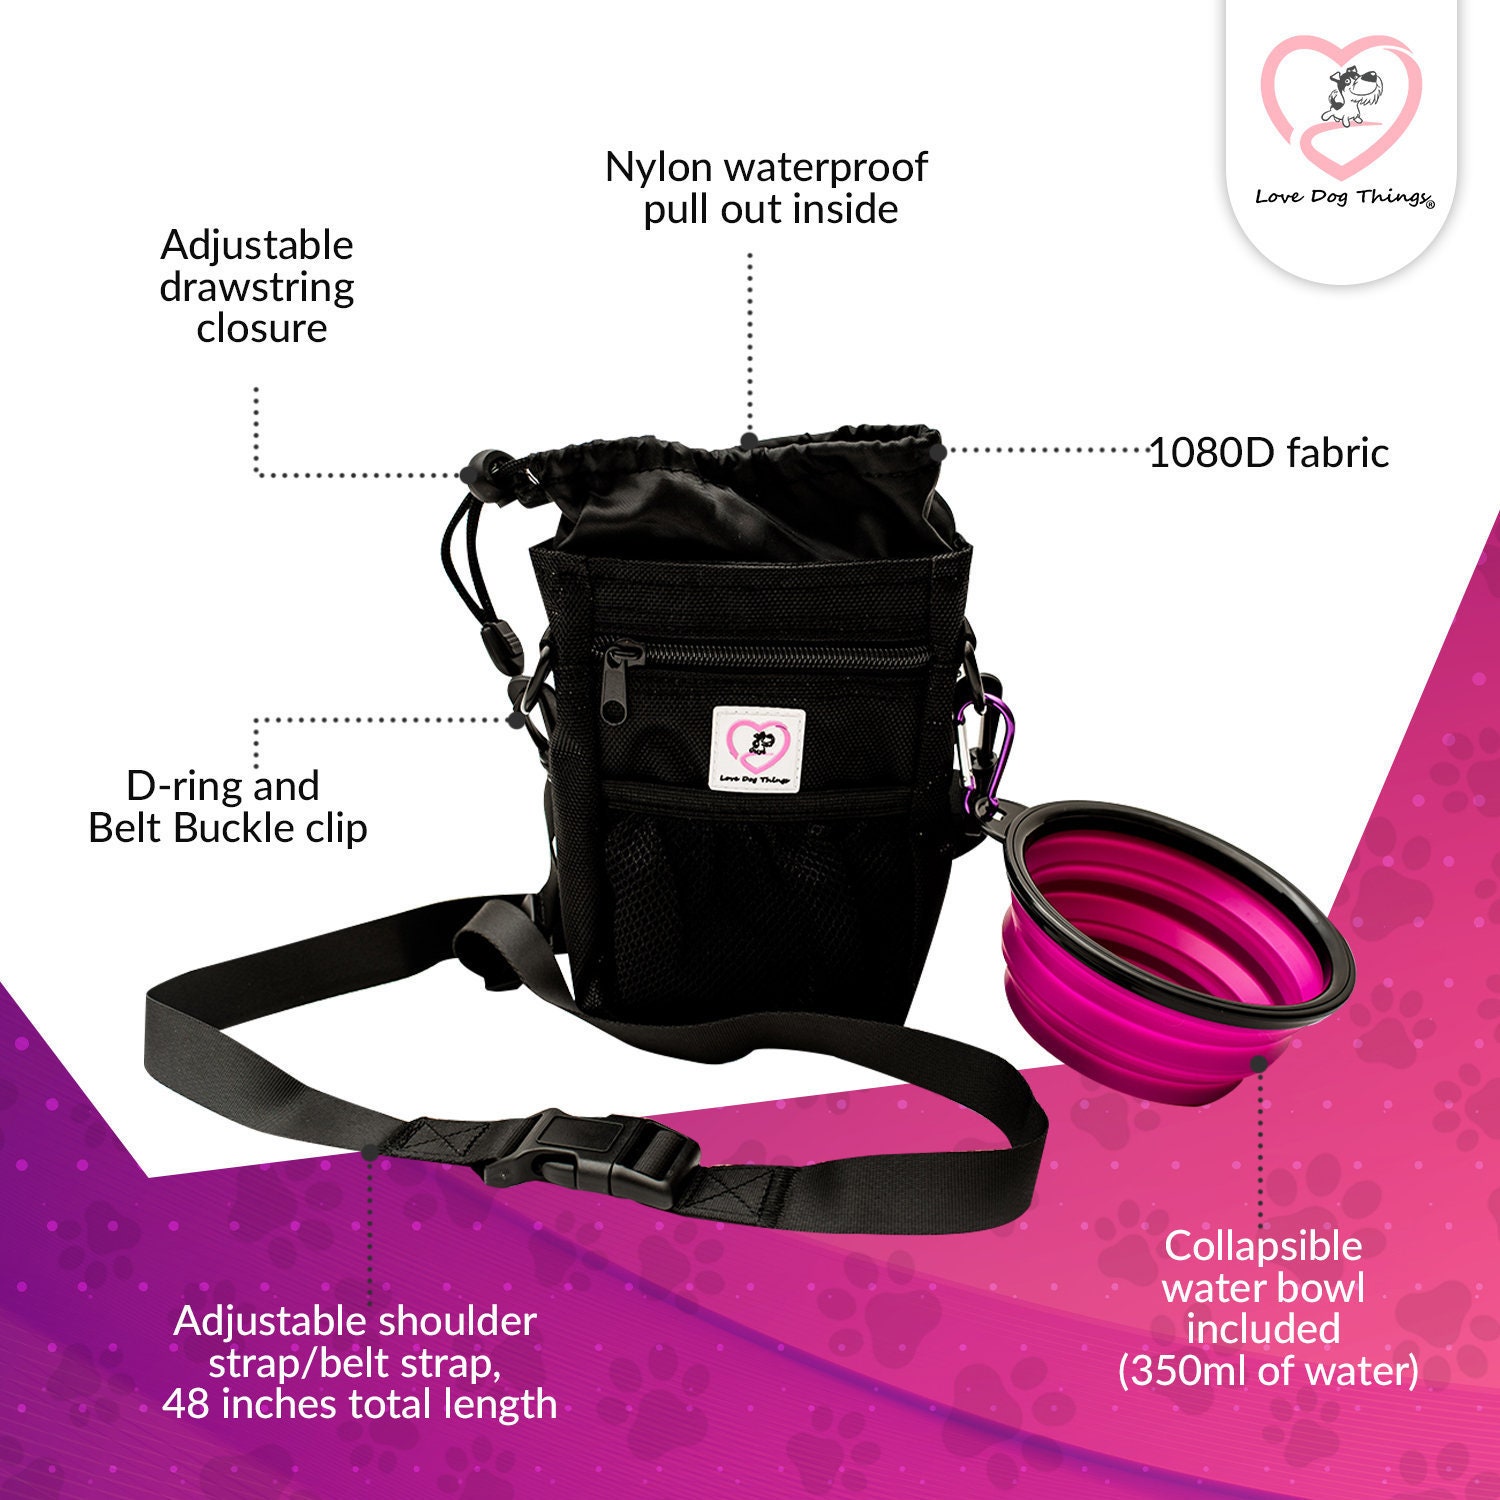 Travel Spacious Bag for Dogs with Built-in Poop Bag Dispenser Waterproof Liner with Shoulder Strap Love Dog Things Dog Treat Bag Pouch for Training 